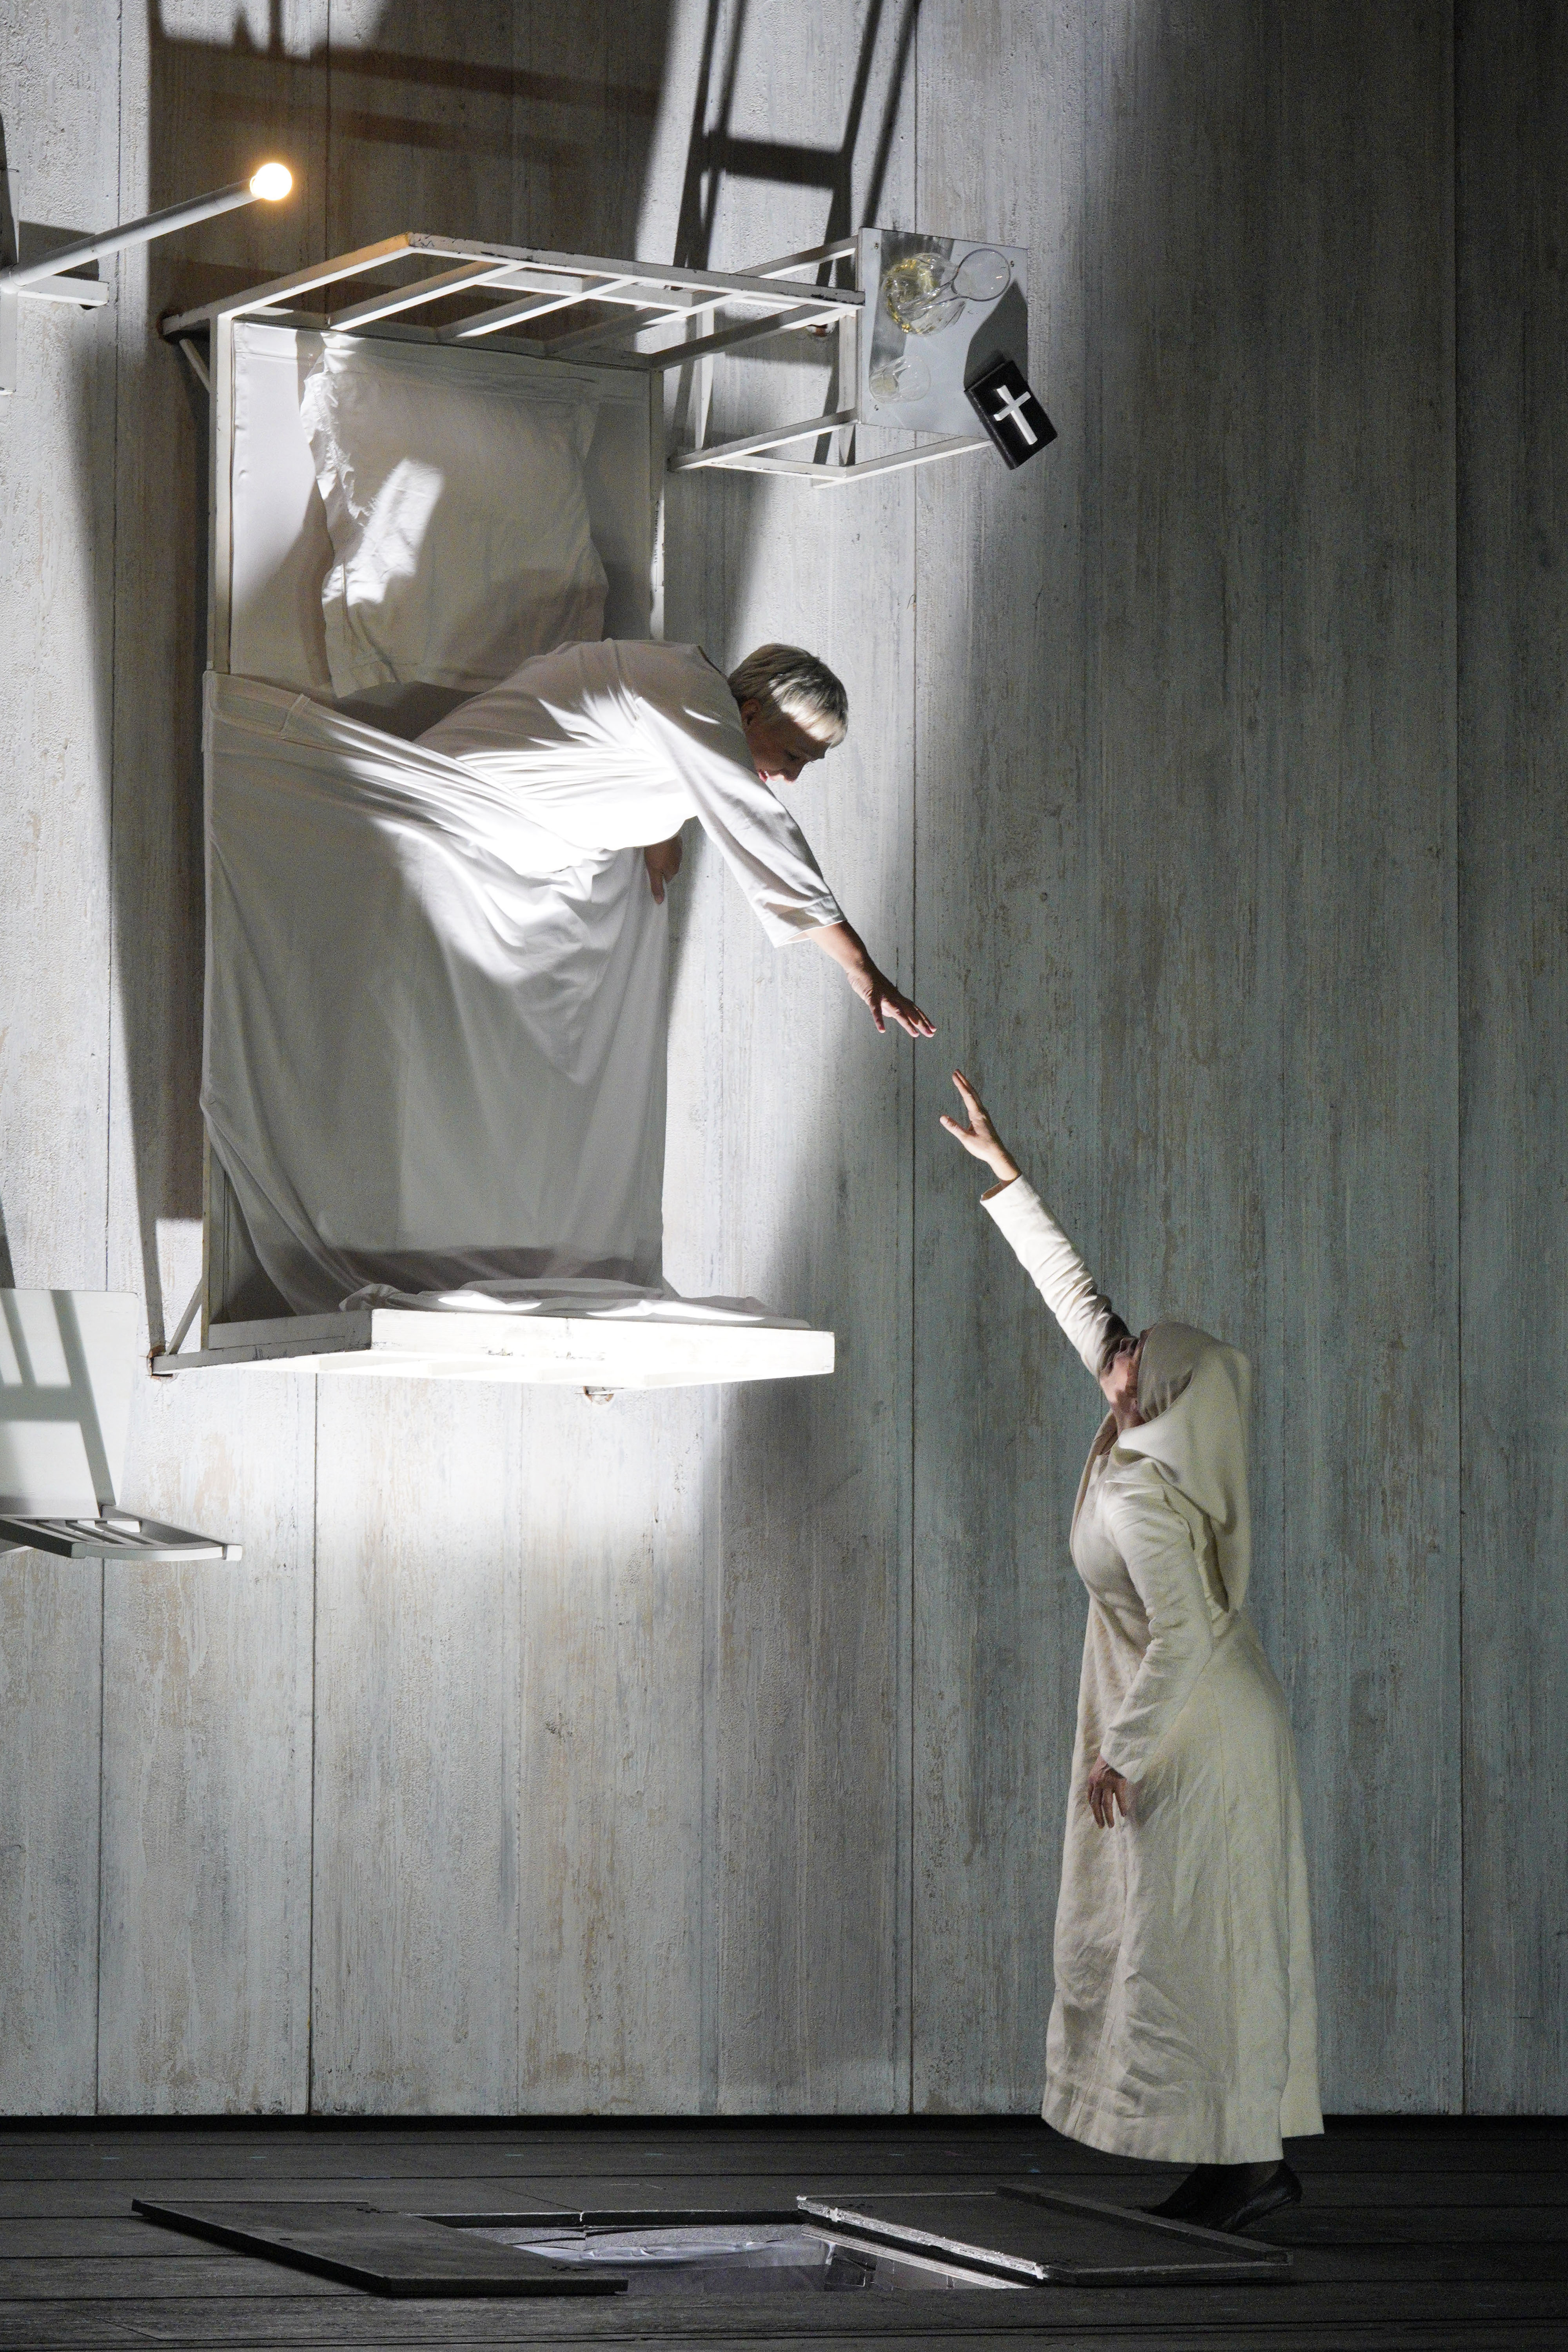 Michaela Schuster in Dialogues of the Carmelites 